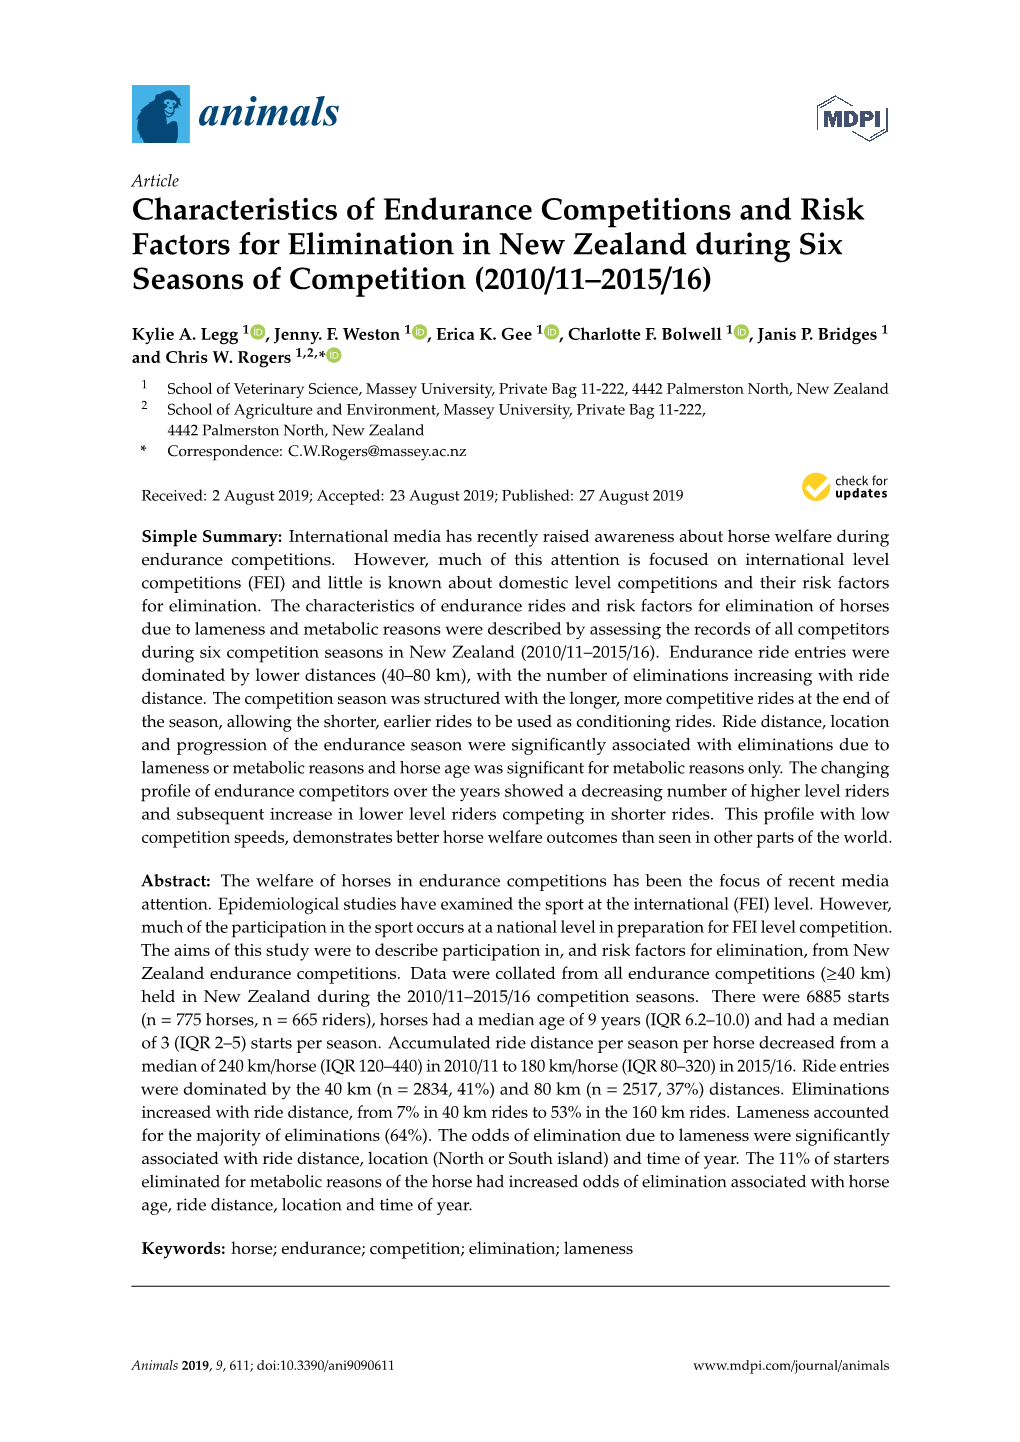 Characteristics of Endurance Competitions and Risk Factors for Elimination in New Zealand During Six Seasons of Competition (2010/11–2015/16)